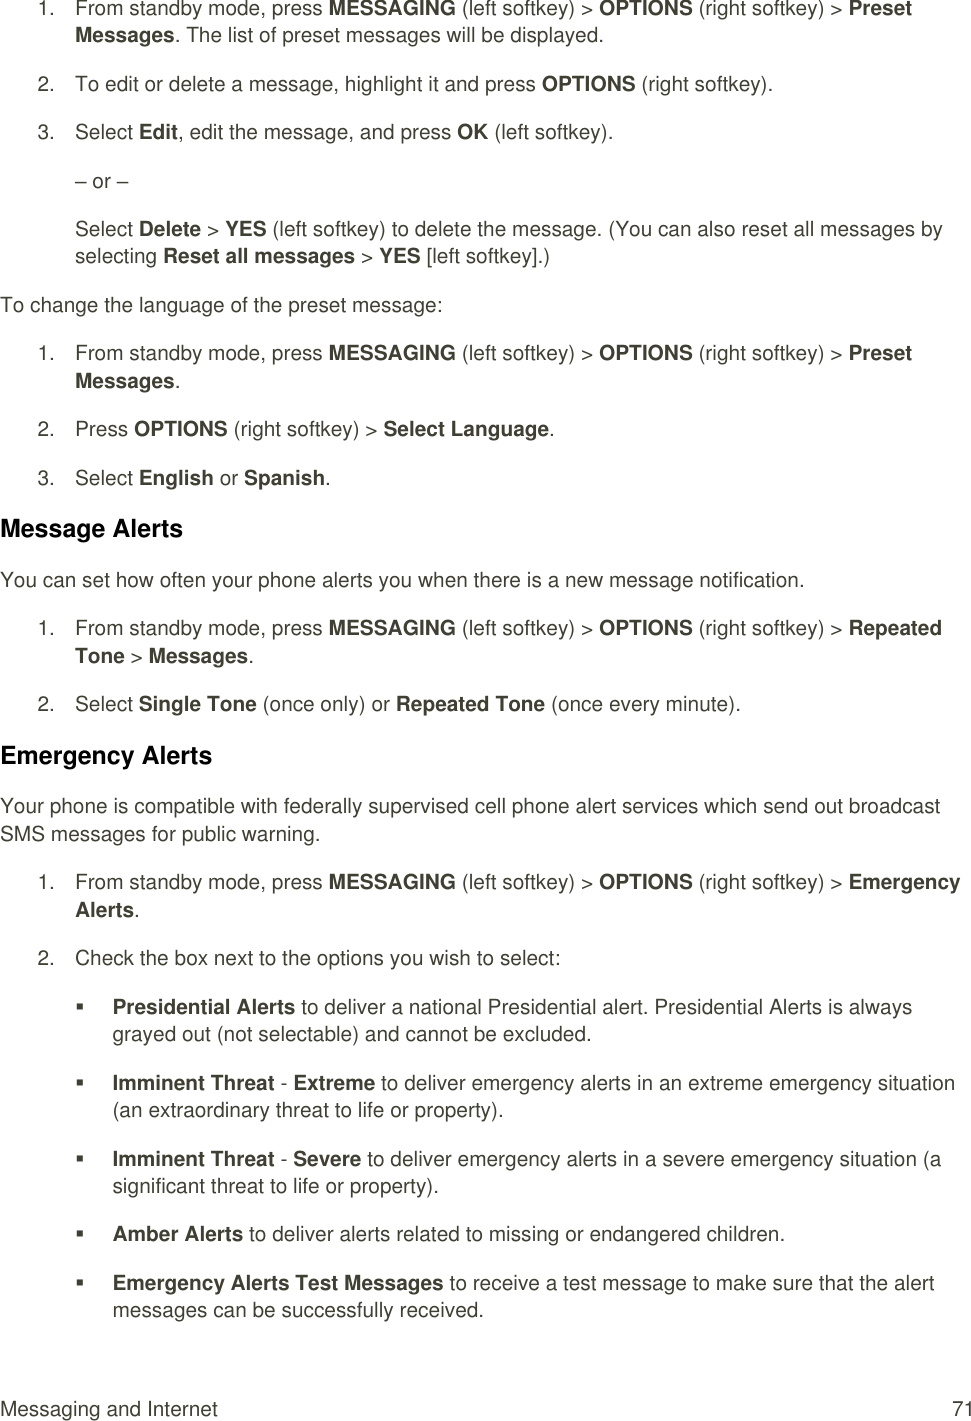  Messaging and Internet  71 1.  From standby mode, press MESSAGING (left softkey) &gt; OPTIONS (right softkey) &gt; Preset Messages. The list of preset messages will be displayed. 2.  To edit or delete a message, highlight it and press OPTIONS (right softkey). 3.  Select Edit, edit the message, and press OK (left softkey). – or – Select Delete &gt; YES (left softkey) to delete the message. (You can also reset all messages by selecting Reset all messages &gt; YES [left softkey].) To change the language of the preset message:  1.  From standby mode, press MESSAGING (left softkey) &gt; OPTIONS (right softkey) &gt; Preset Messages. 2.  Press OPTIONS (right softkey) &gt; Select Language. 3.  Select English or Spanish. Message Alerts You can set how often your phone alerts you when there is a new message notification. 1.  From standby mode, press MESSAGING (left softkey) &gt; OPTIONS (right softkey) &gt; Repeated Tone &gt; Messages. 2.  Select Single Tone (once only) or Repeated Tone (once every minute). Emergency Alerts Your phone is compatible with federally supervised cell phone alert services which send out broadcast SMS messages for public warning. 1.  From standby mode, press MESSAGING (left softkey) &gt; OPTIONS (right softkey) &gt; Emergency Alerts. 2.  Check the box next to the options you wish to select:  Presidential Alerts to deliver a national Presidential alert. Presidential Alerts is always grayed out (not selectable) and cannot be excluded.  Imminent Threat - Extreme to deliver emergency alerts in an extreme emergency situation (an extraordinary threat to life or property).  Imminent Threat - Severe to deliver emergency alerts in a severe emergency situation (a significant threat to life or property).  Amber Alerts to deliver alerts related to missing or endangered children.  Emergency Alerts Test Messages to receive a test message to make sure that the alert messages can be successfully received.  